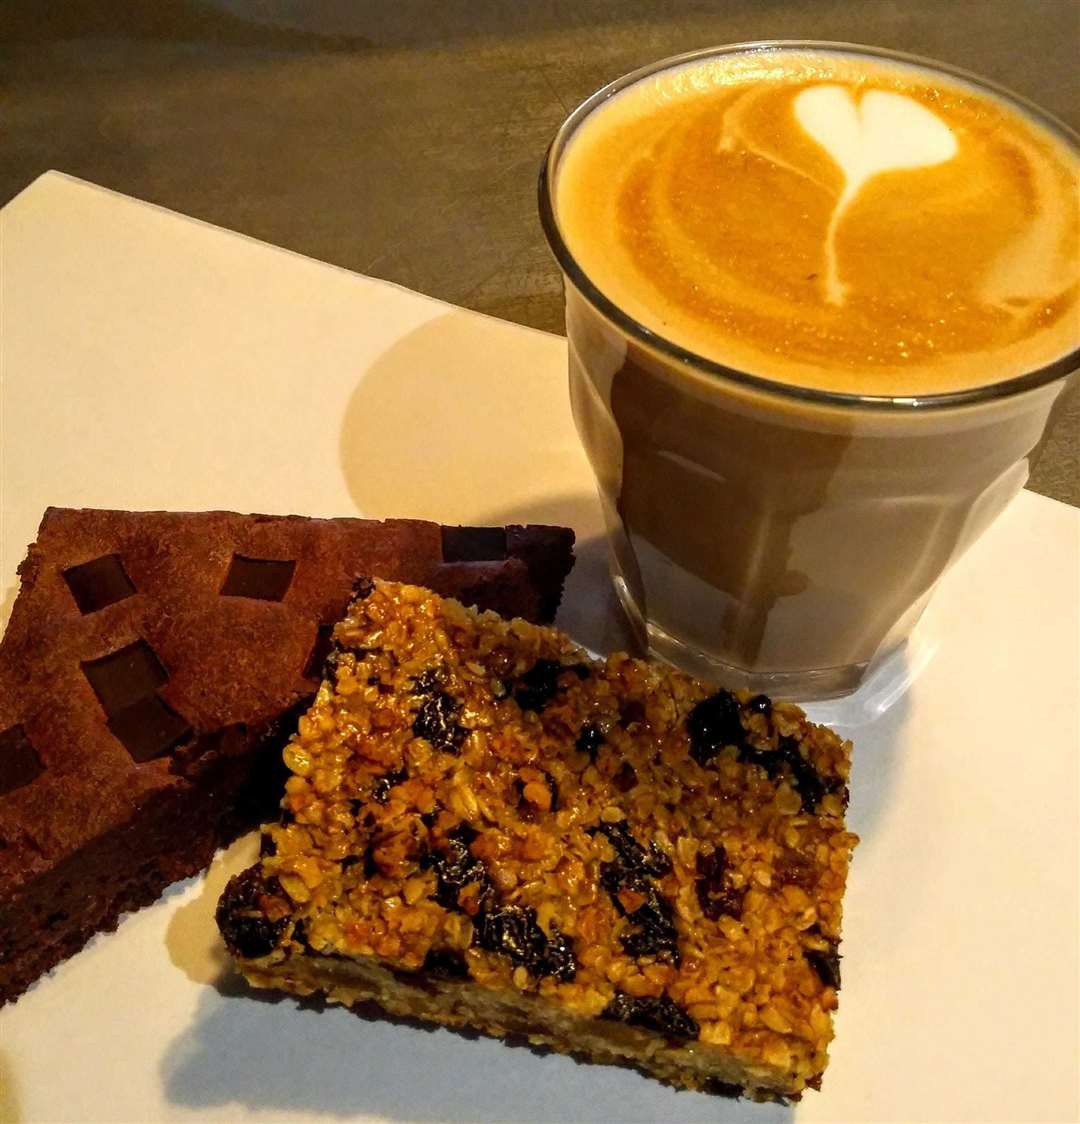 The vegan offerings from Matestone in Maidstone High Street include an oat flat white